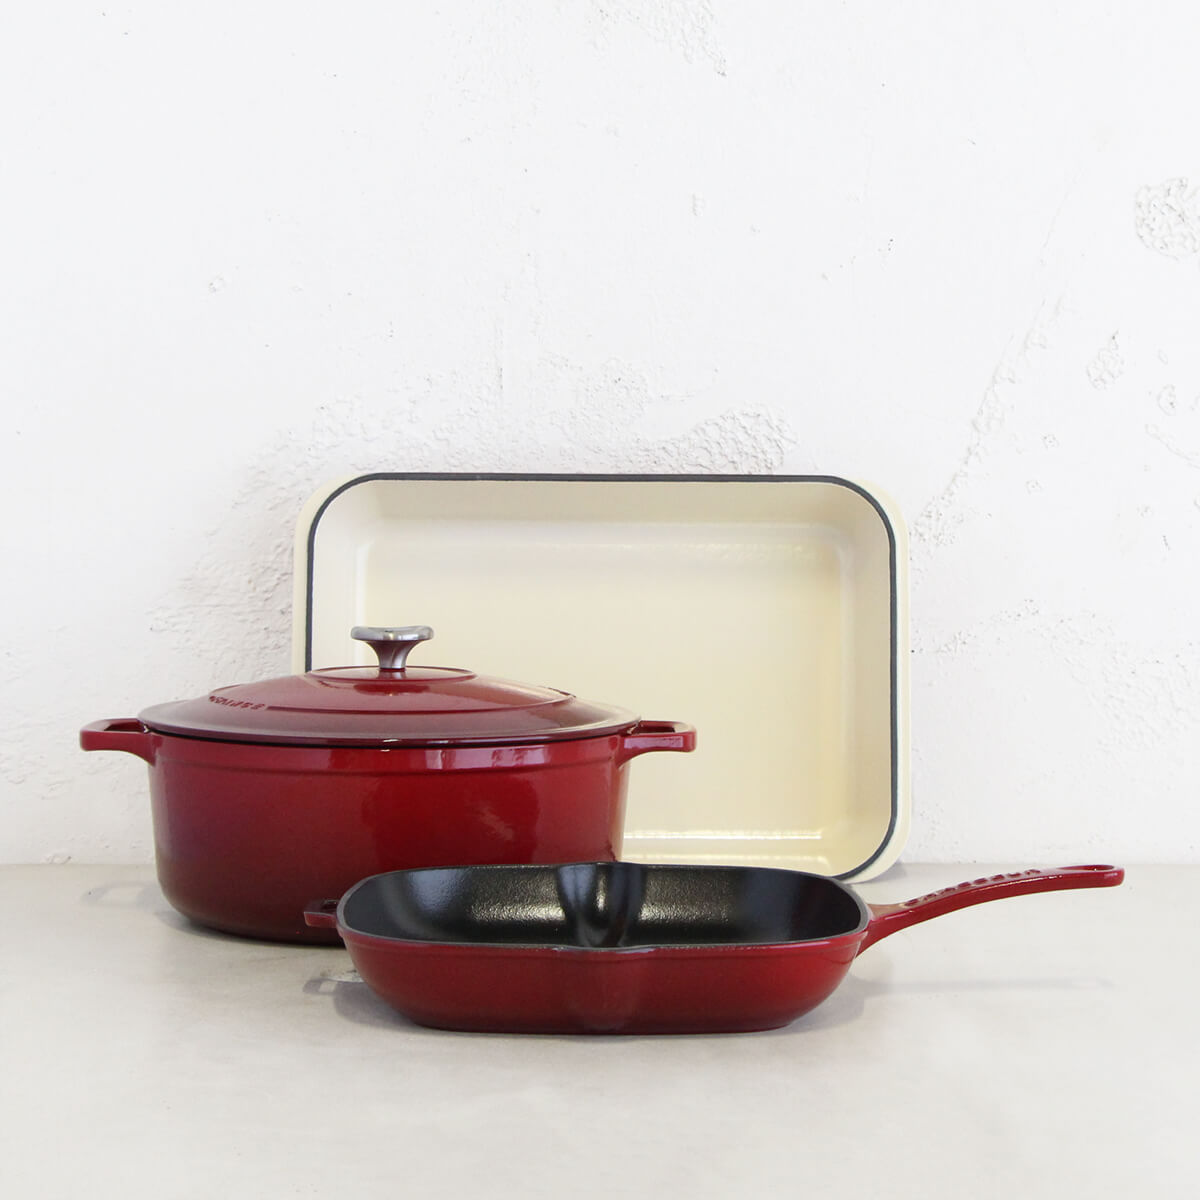 Chasseur French Enameled Cast Iron 7 Wok with Glass Lid - Red